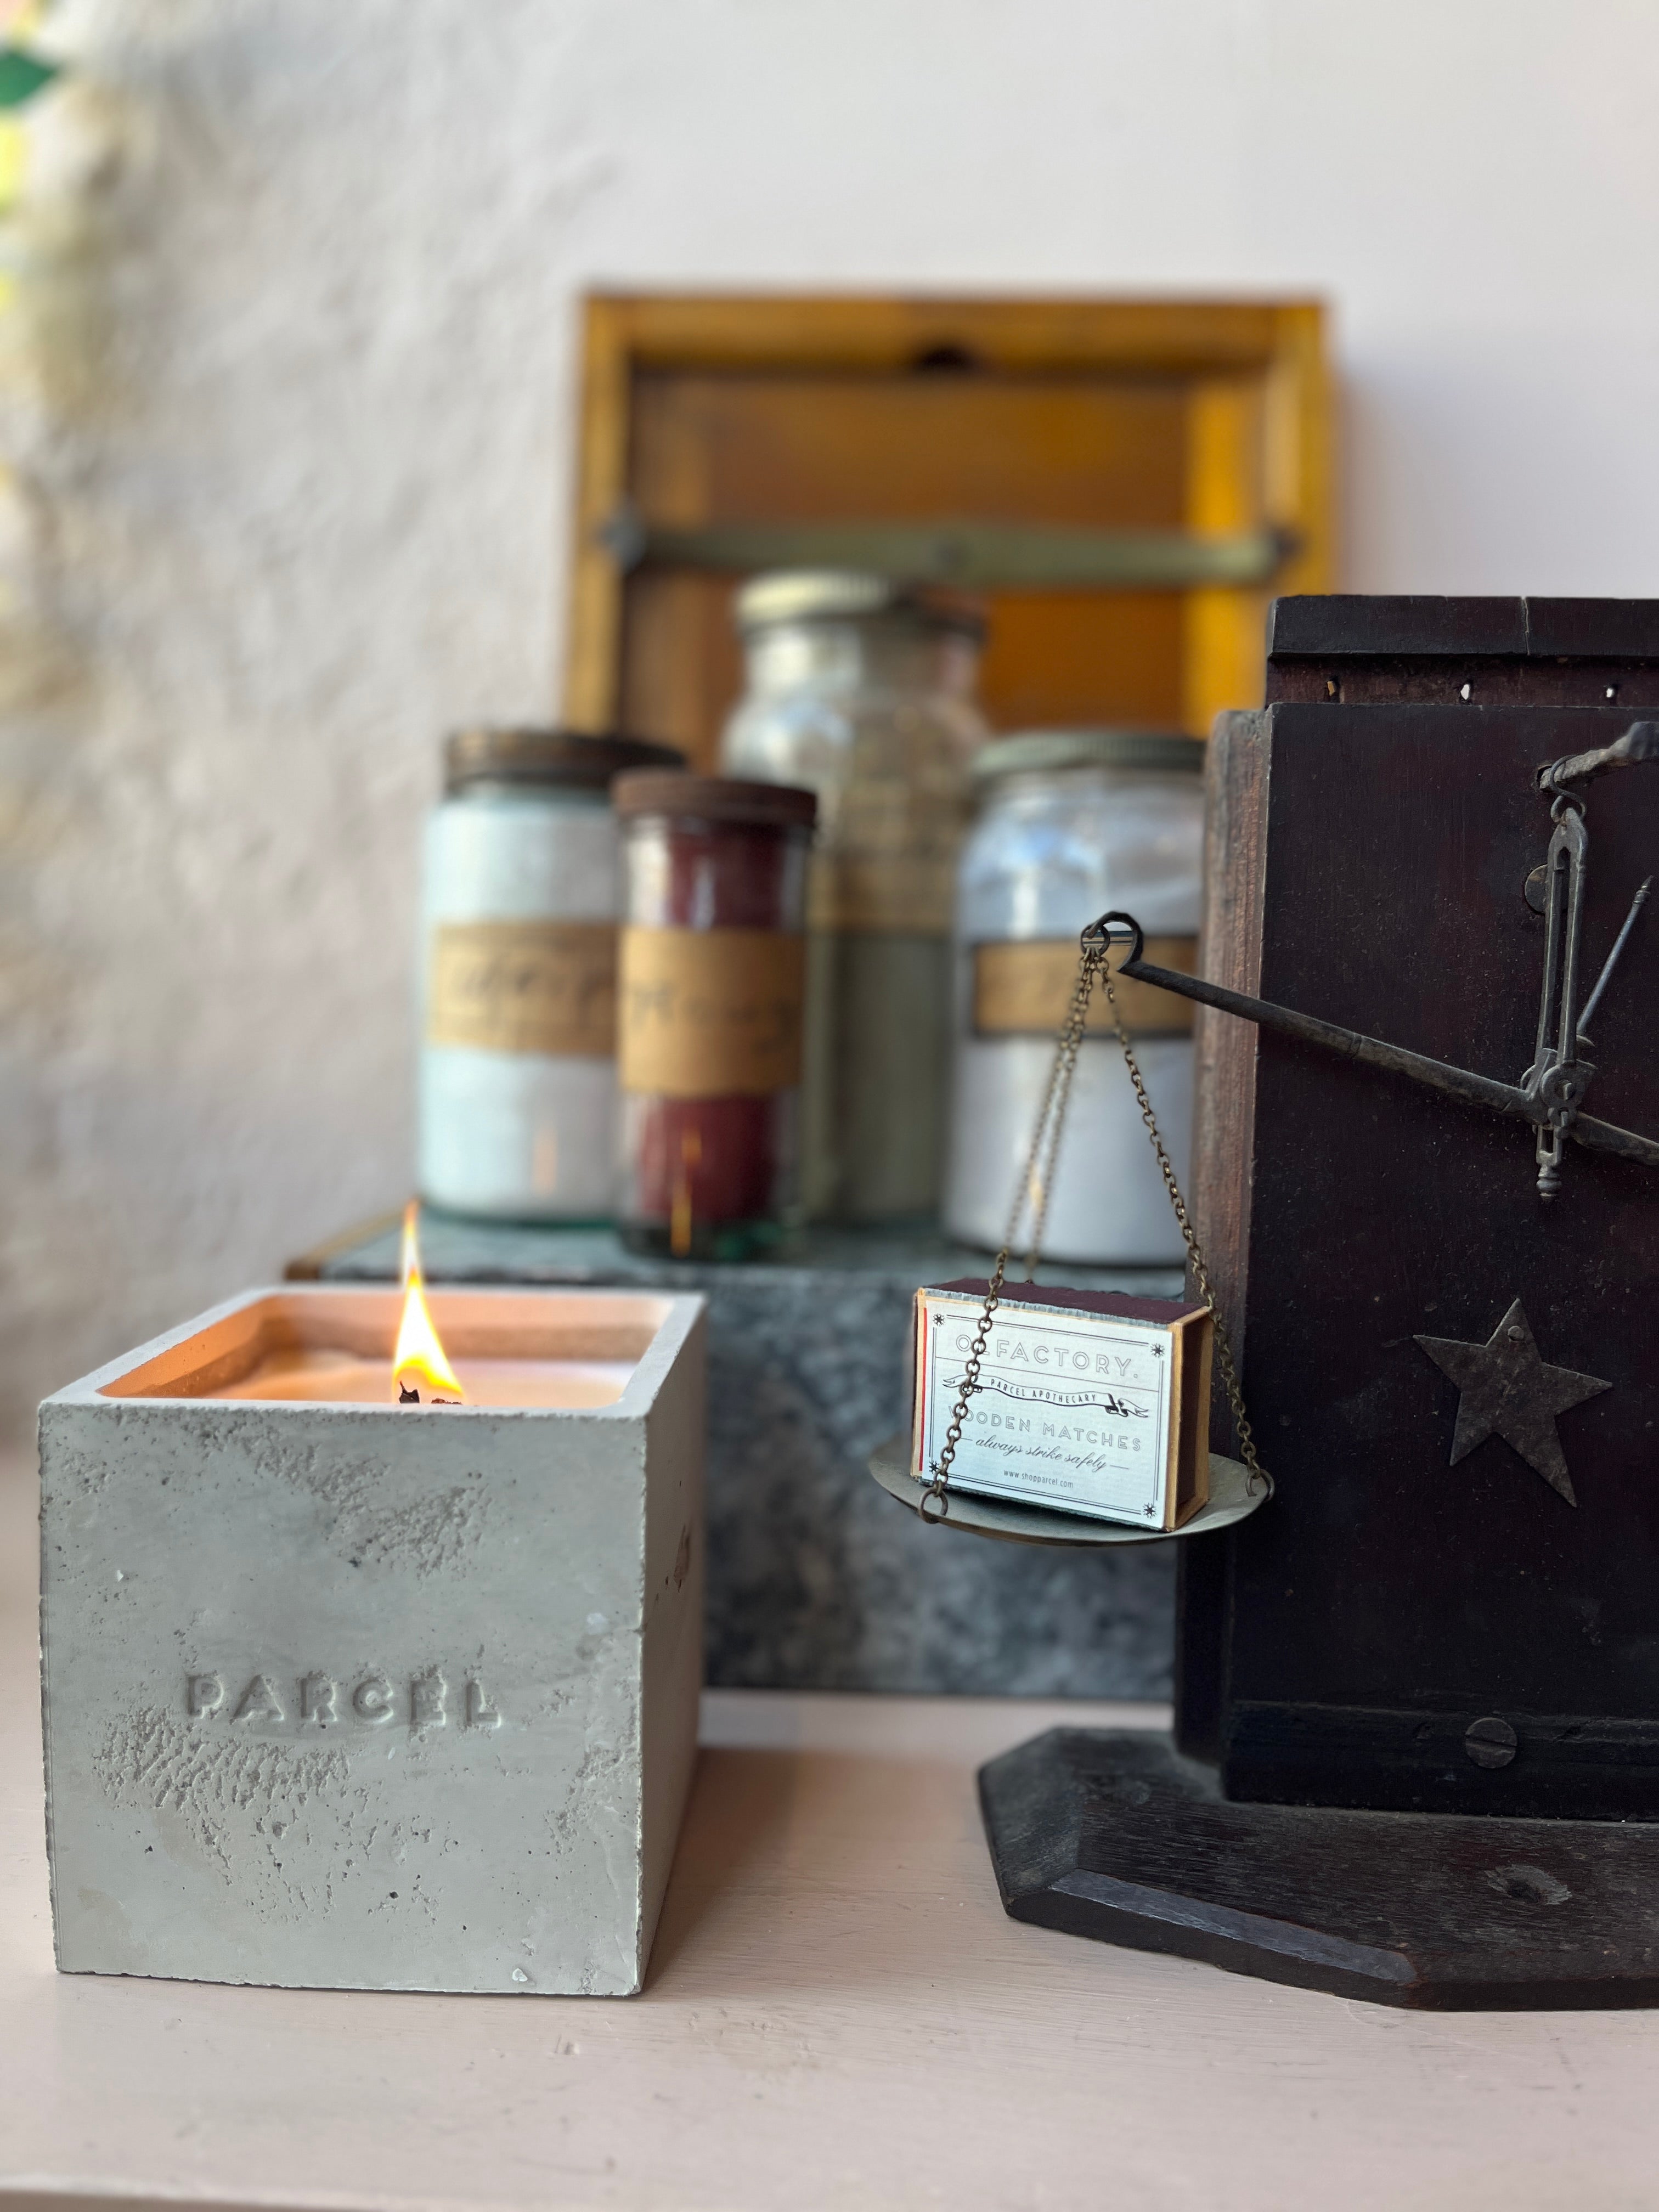 No. 2: Archive Parcel Olfactory Scented Candle in Concrete Vessel